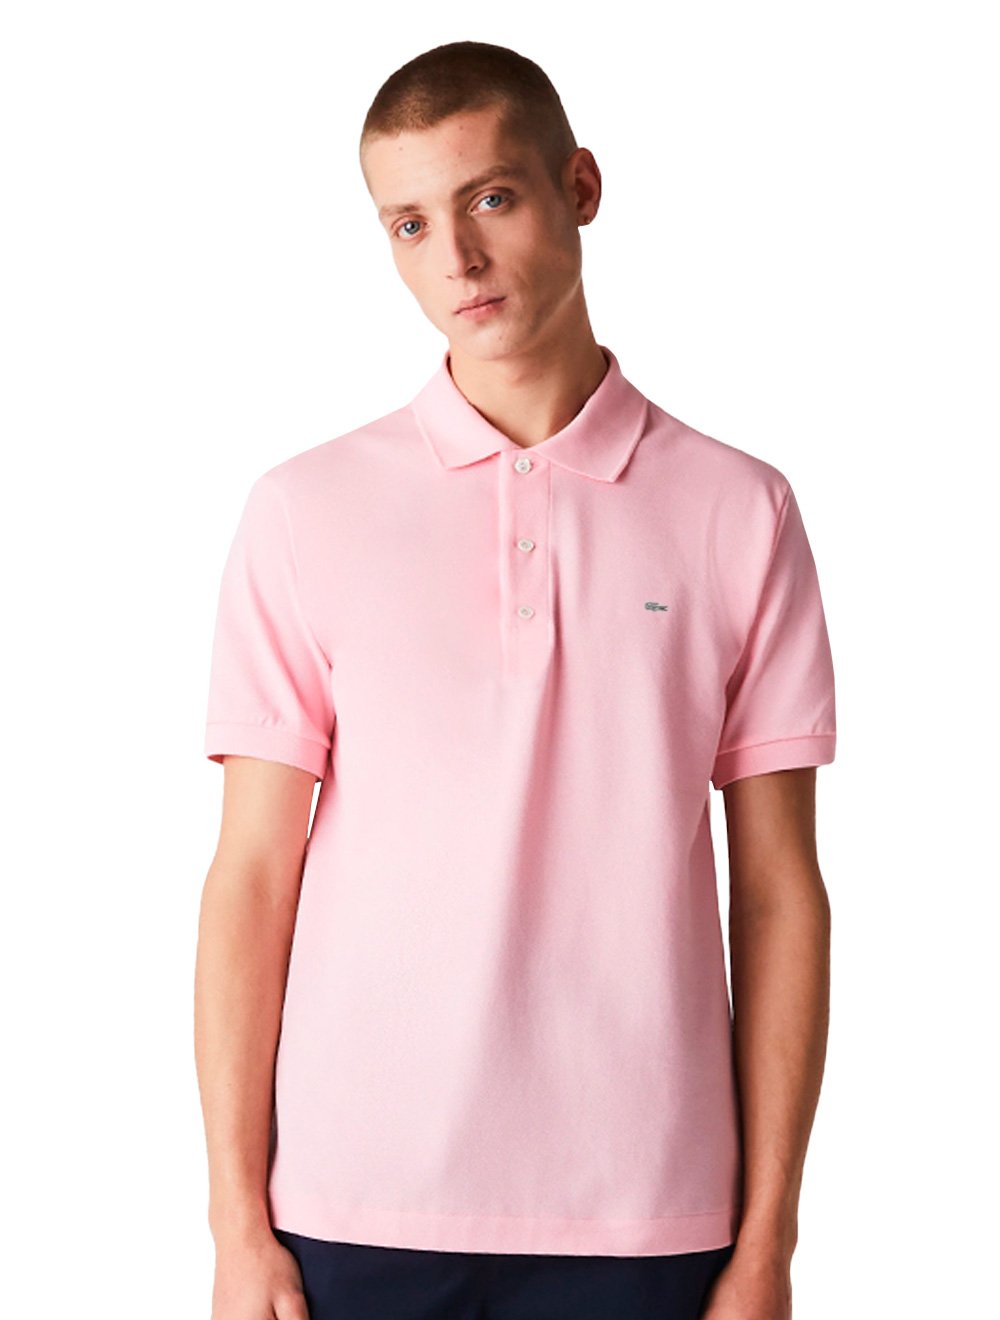 Polo Lacoste Masculina Piquet Slim Fit Stretch Rosa